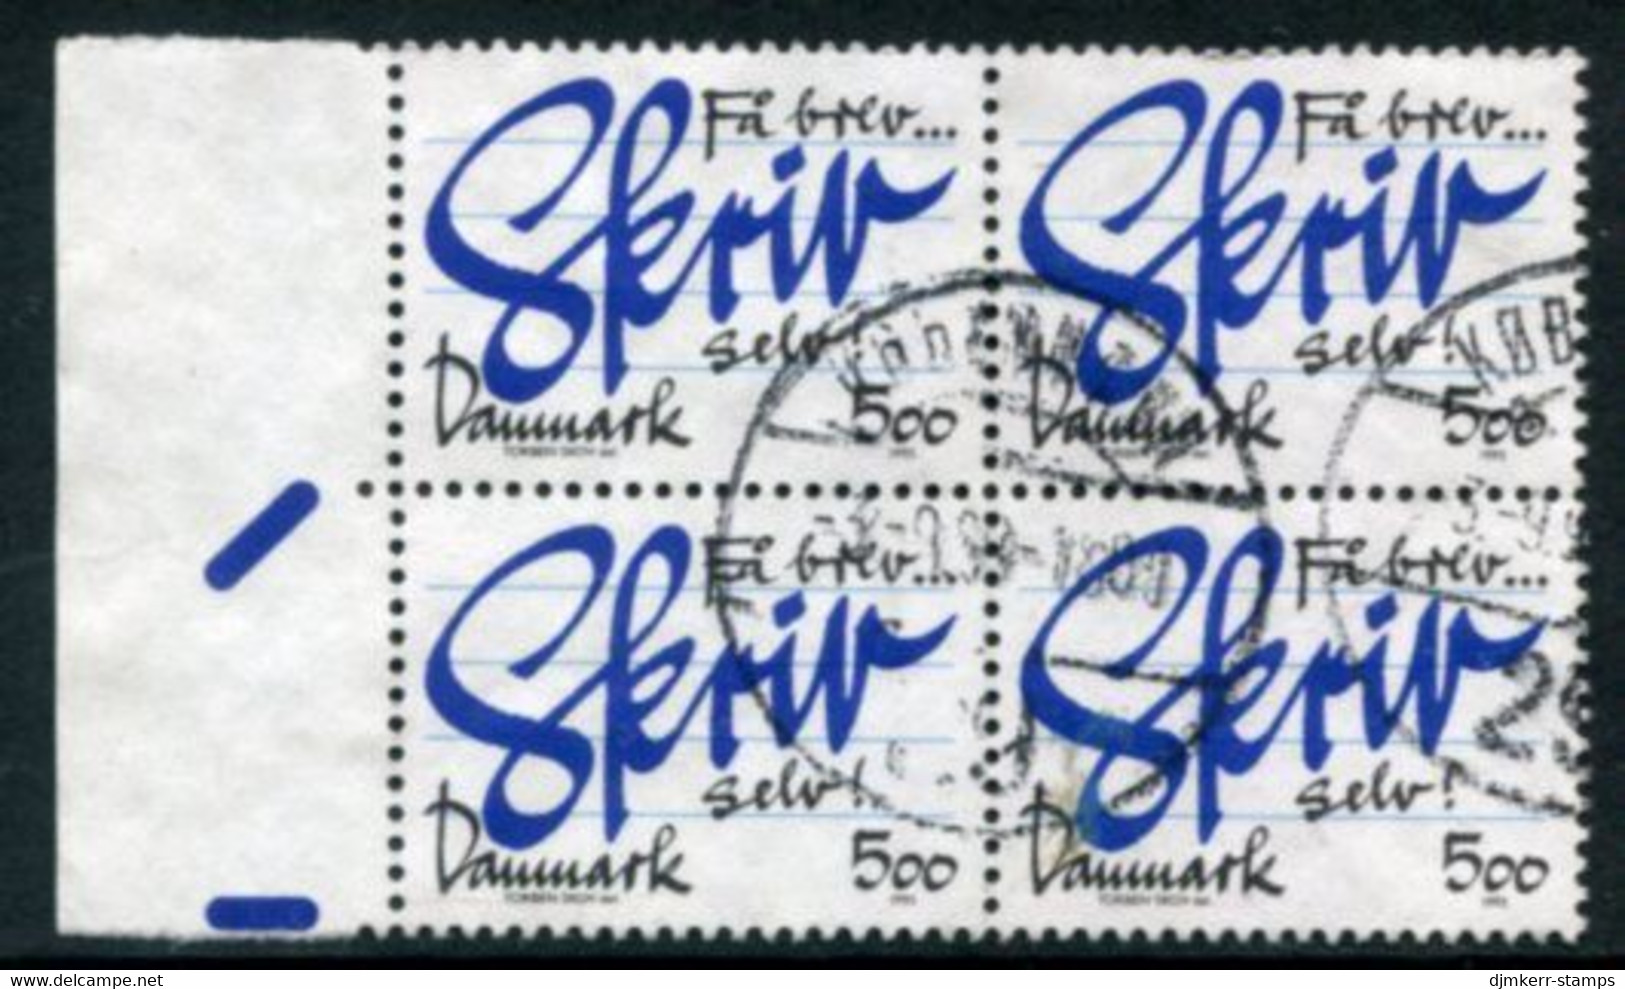 DENMARK 1993 Letter-writing Campaign Block Of 4 Used. Michel 1062 - Used Stamps